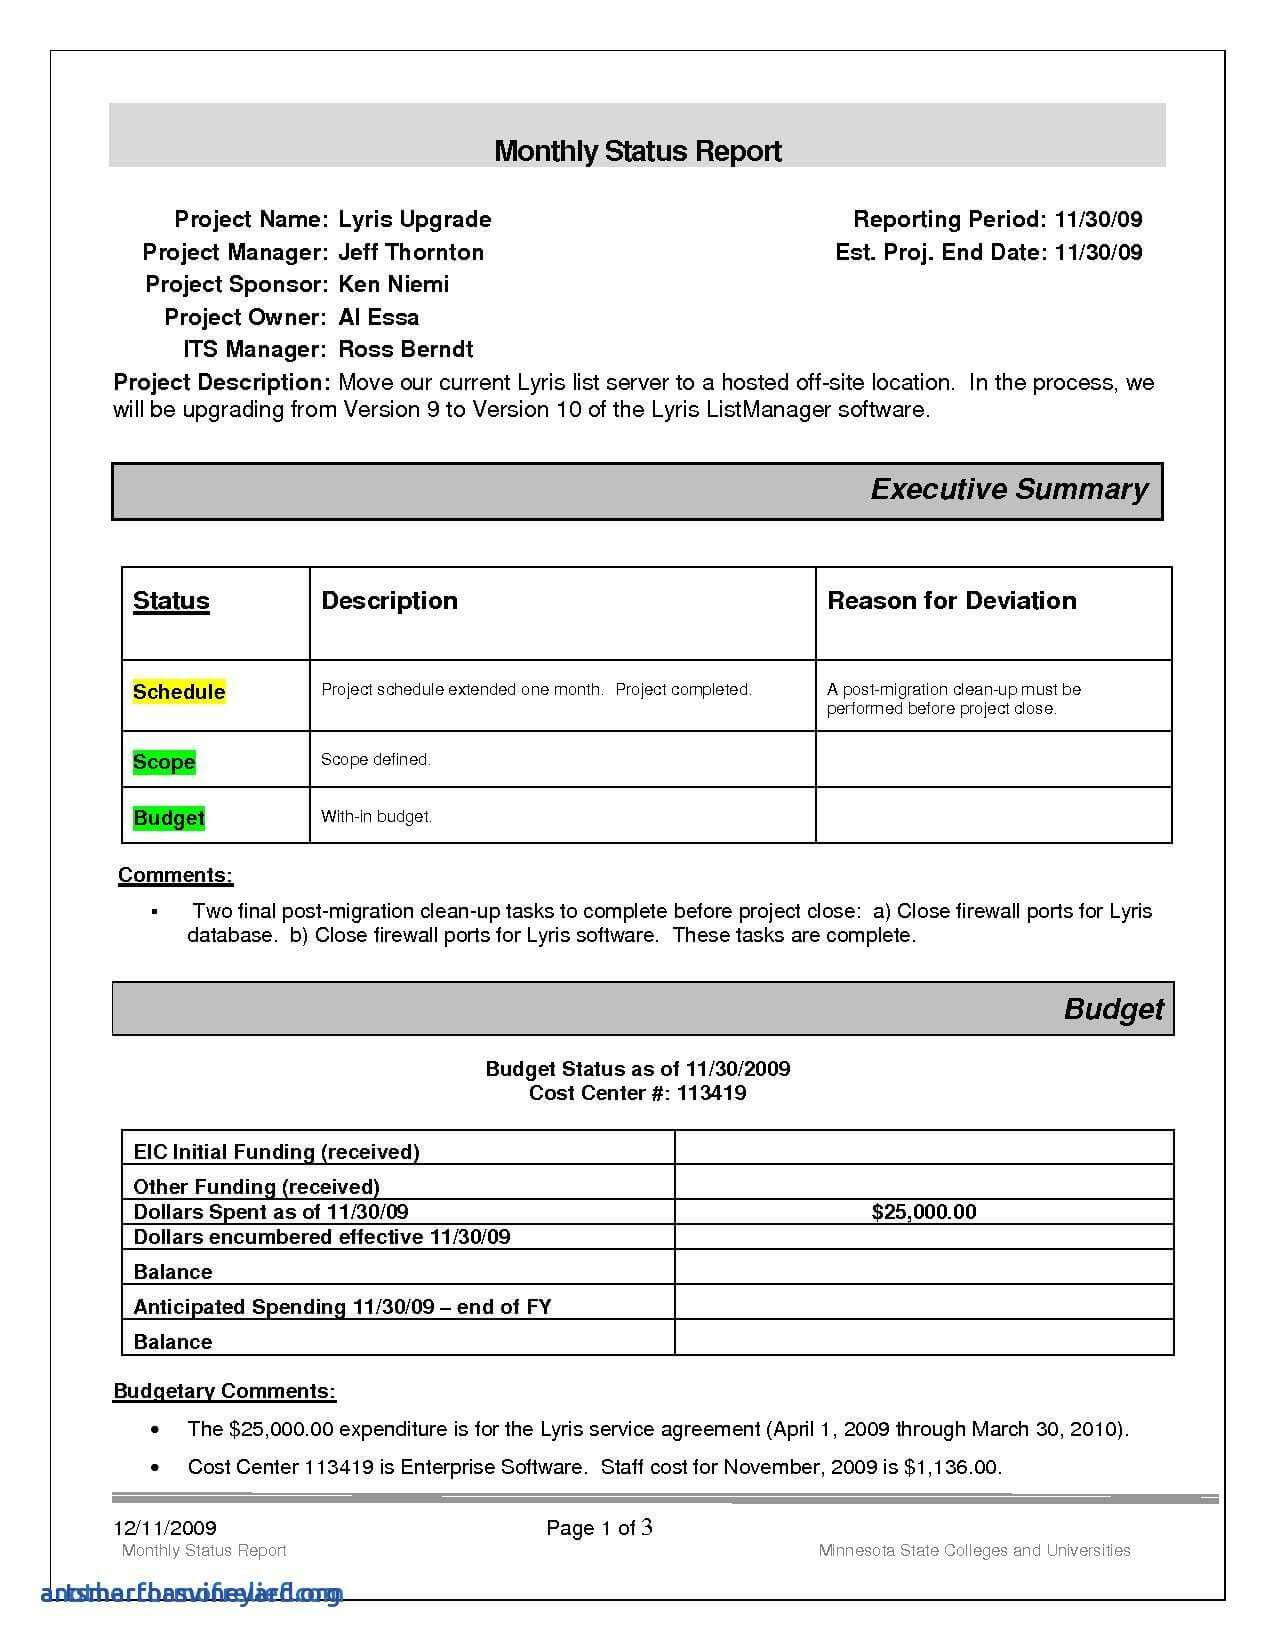 Sample Carfax Report | Glendale Community In Shop Report Template